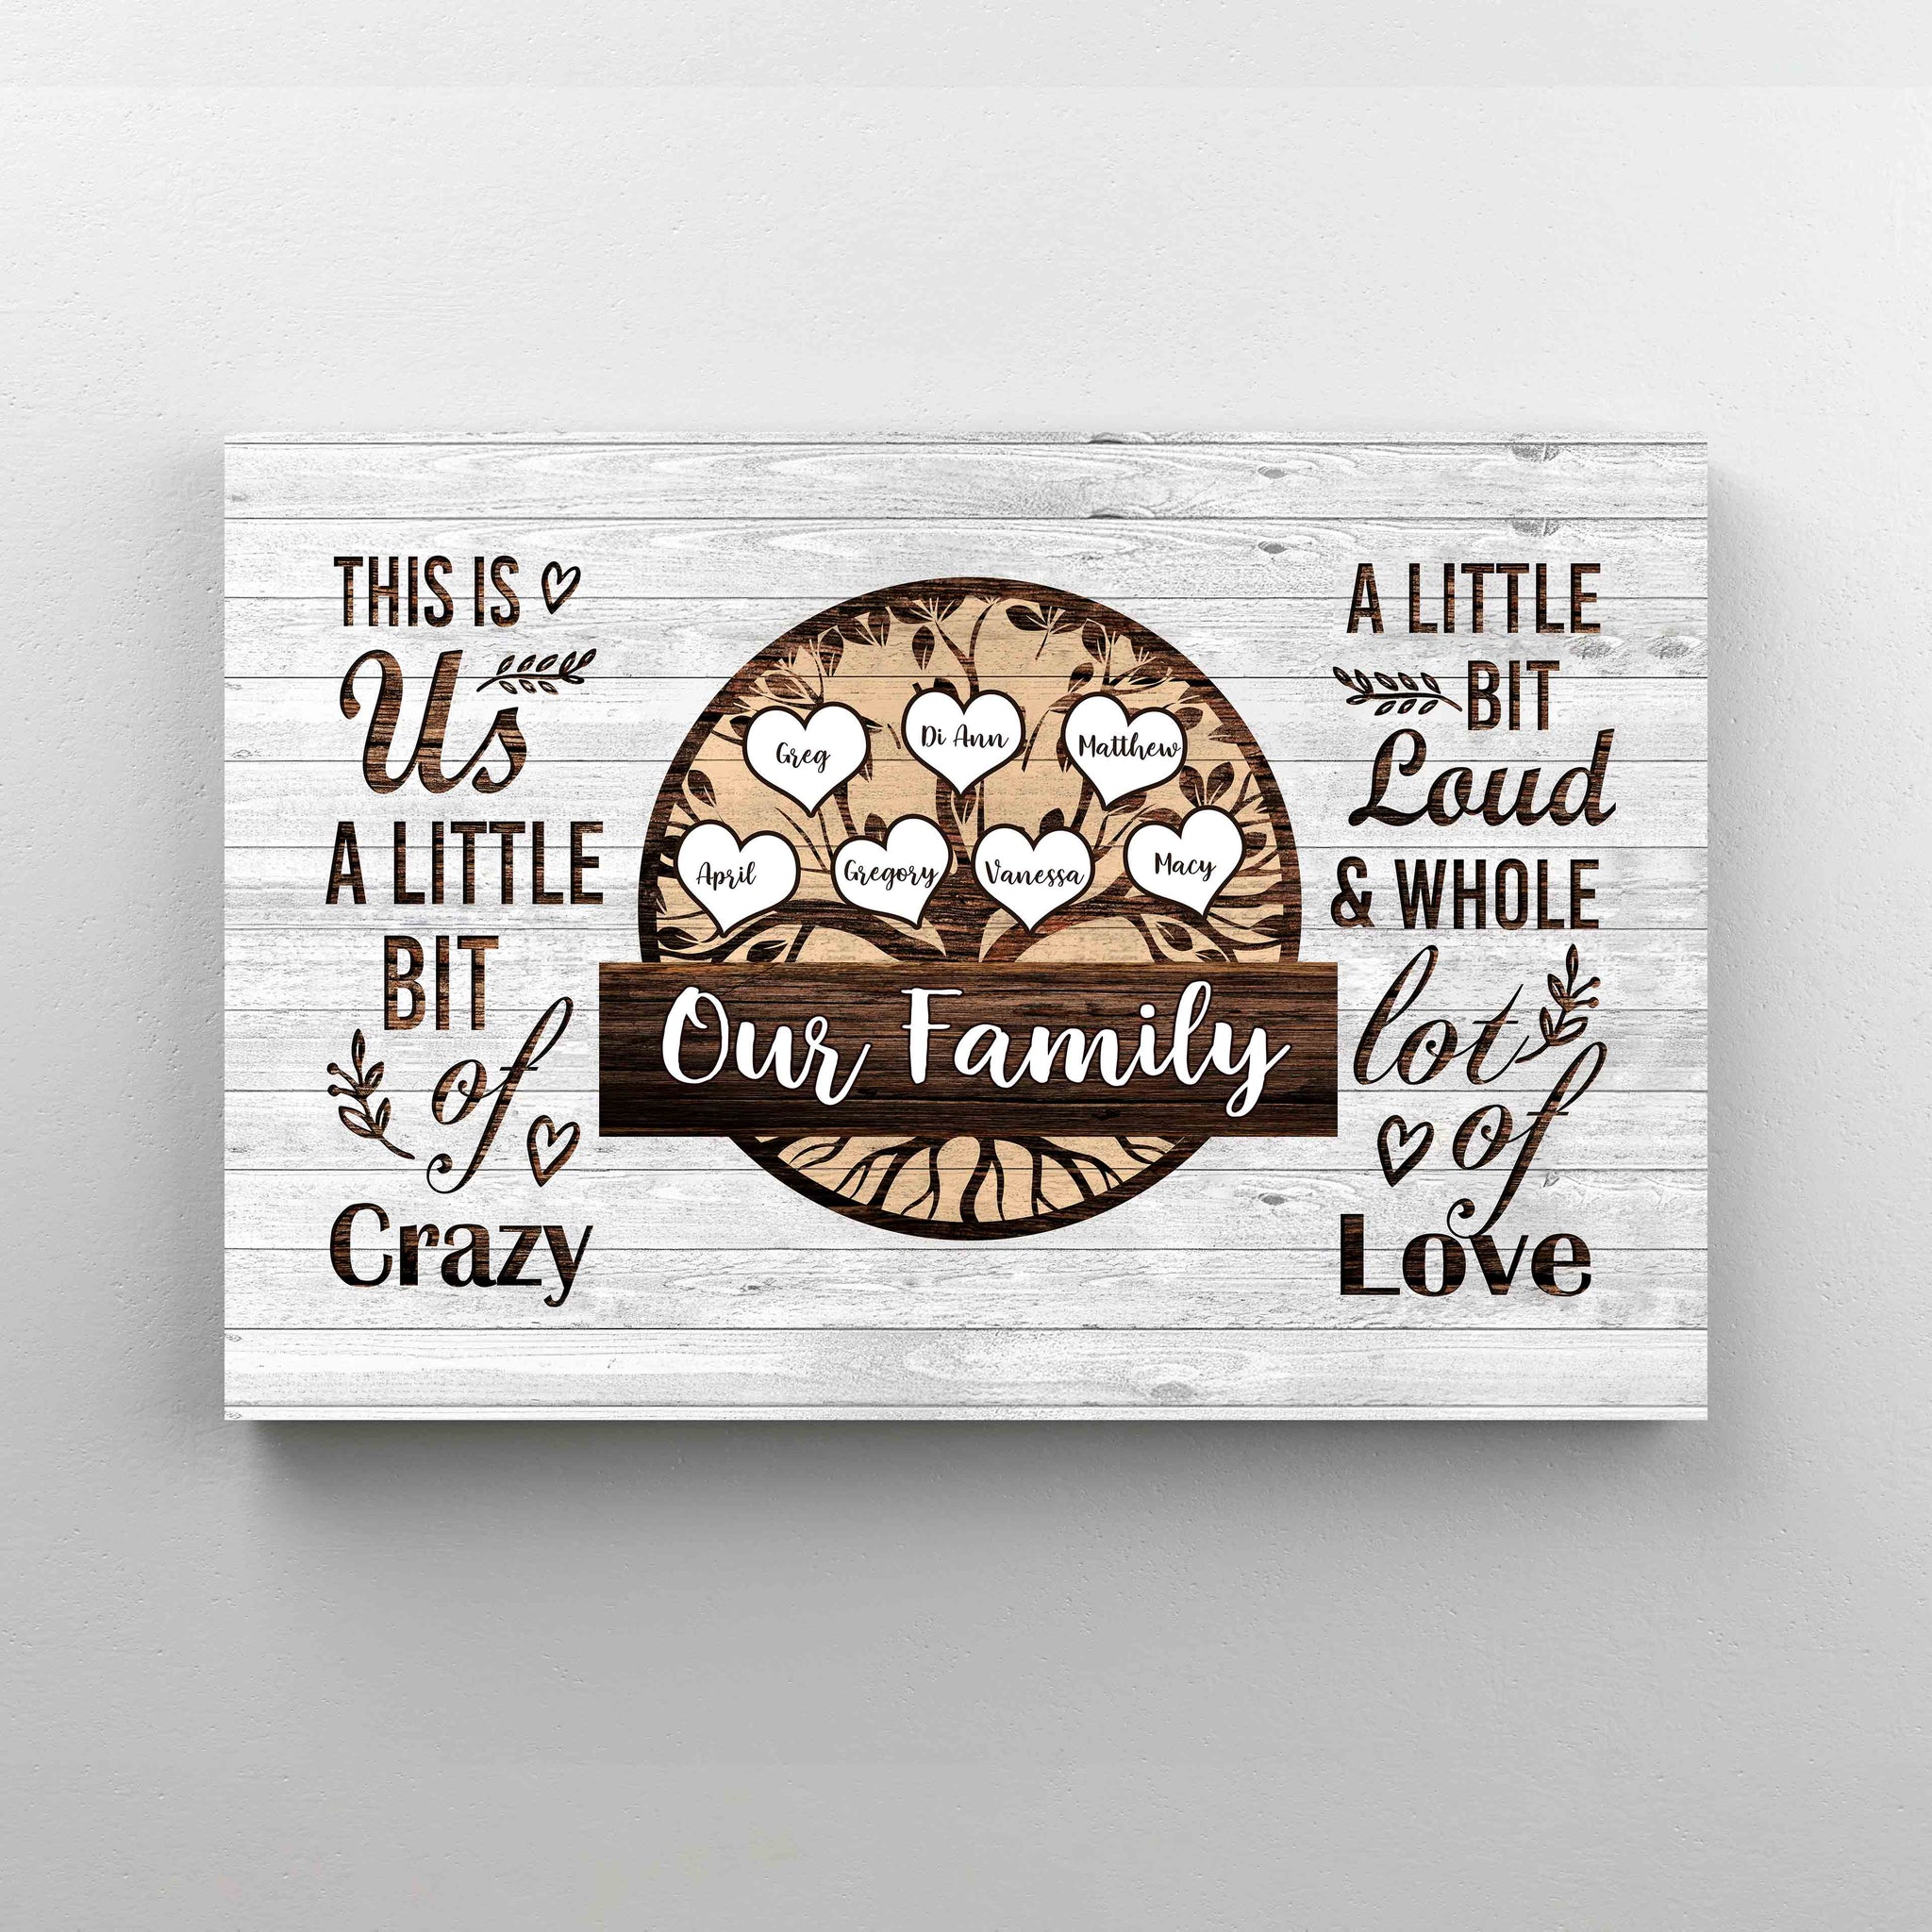 Personalized Name Canvas, This Is Us Canvas, Family Canvas, Wall Art Canvas